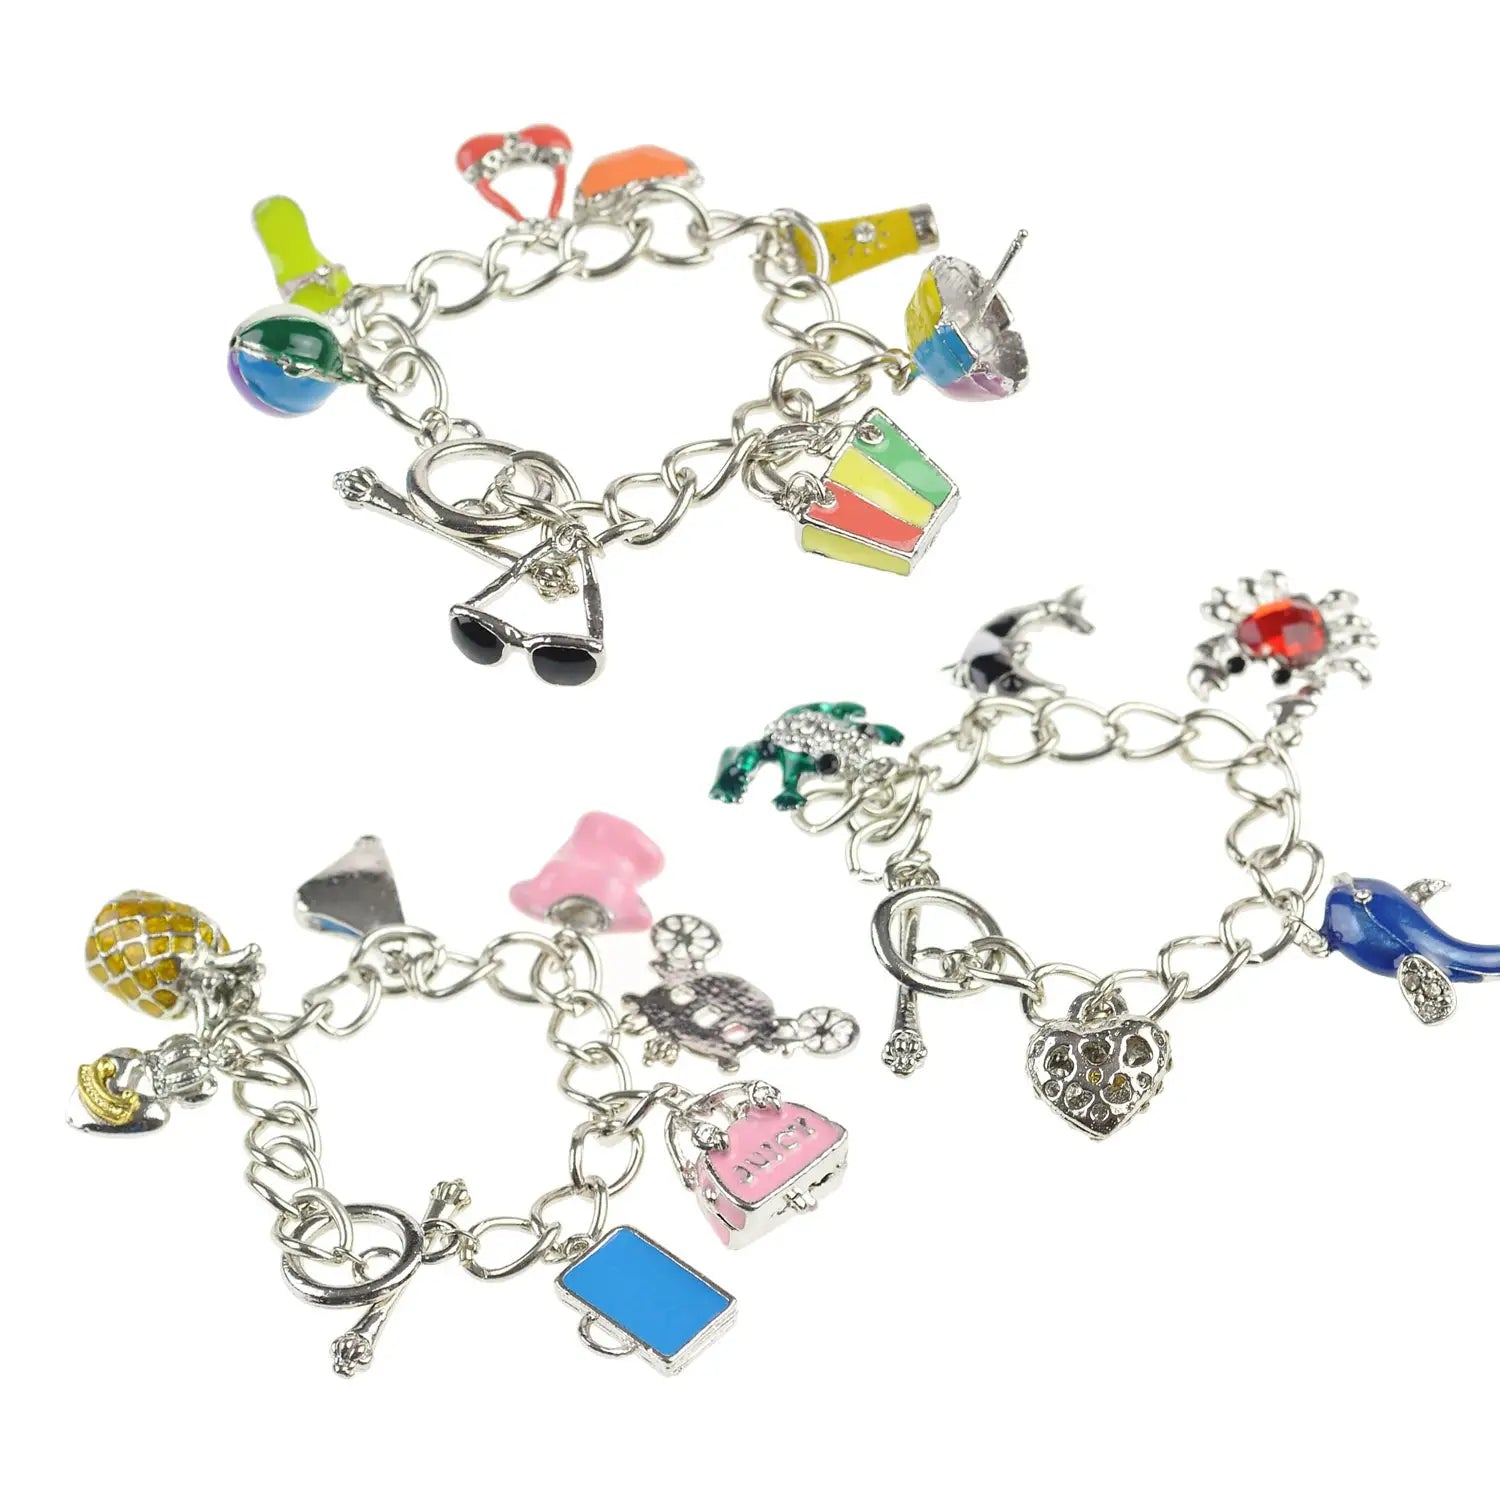 Metal charm bracelets with assorted charms - 3 pack.